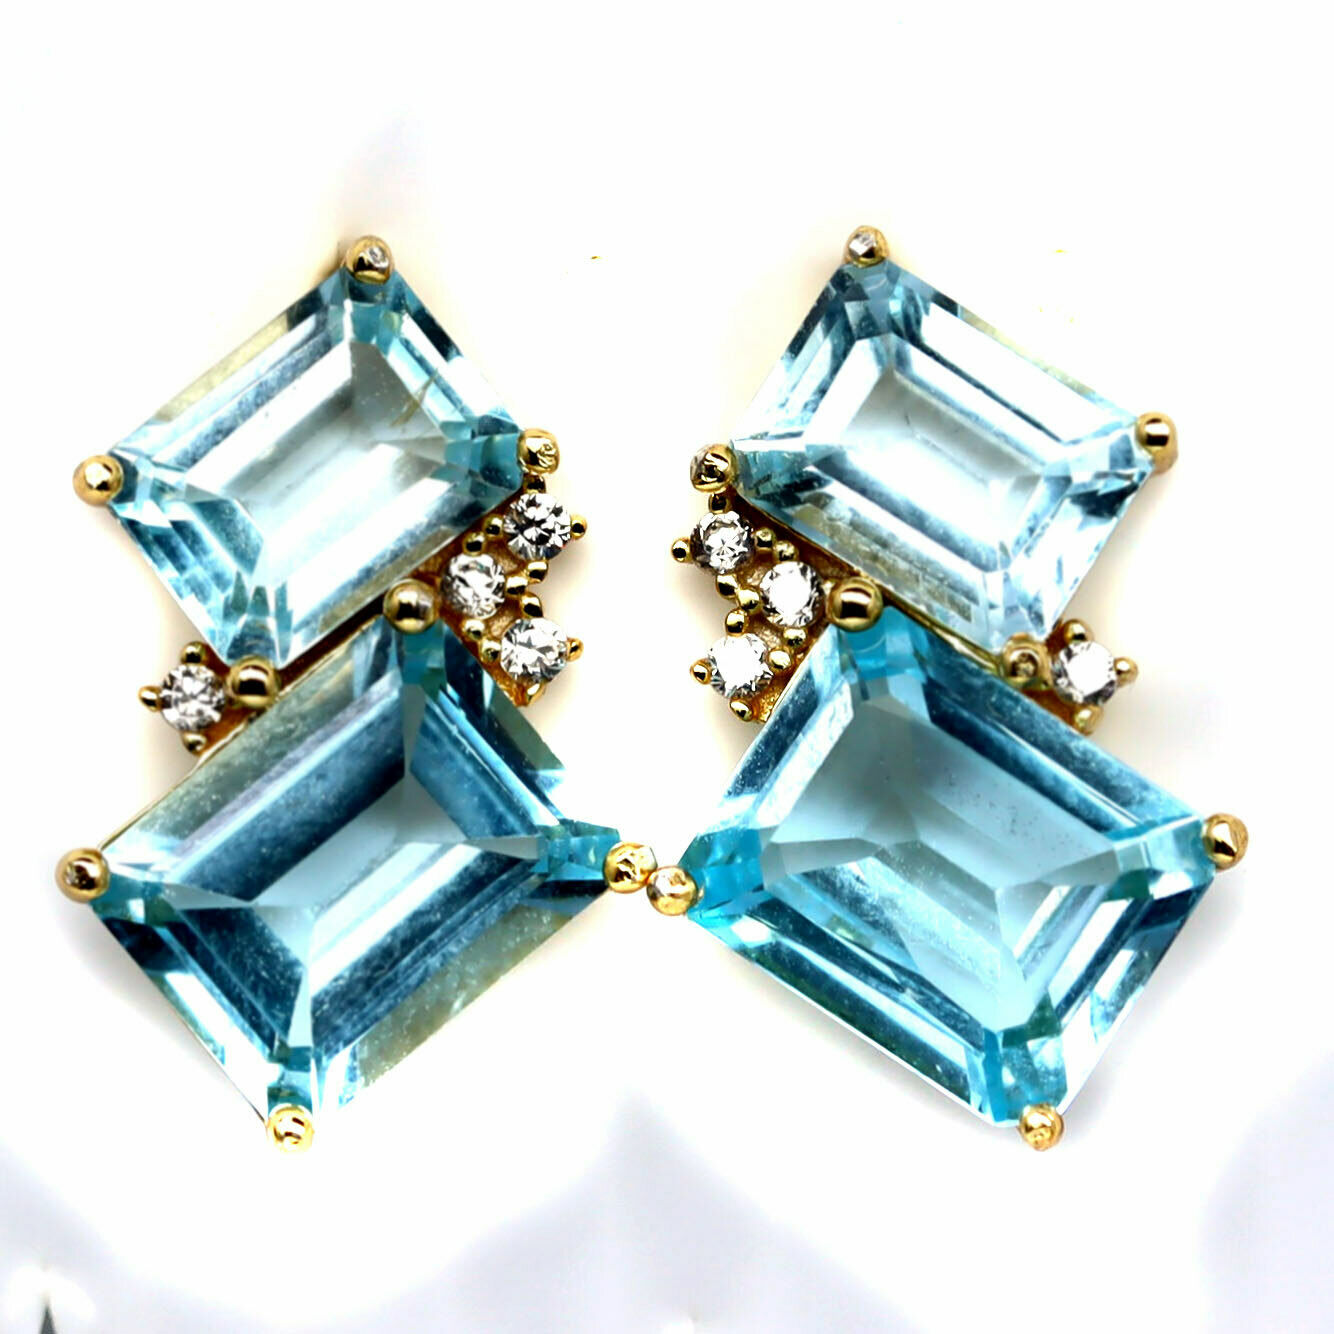 A pair of gold on 925 silver earrings set with baguette cut blue topaz, L. 2cm.